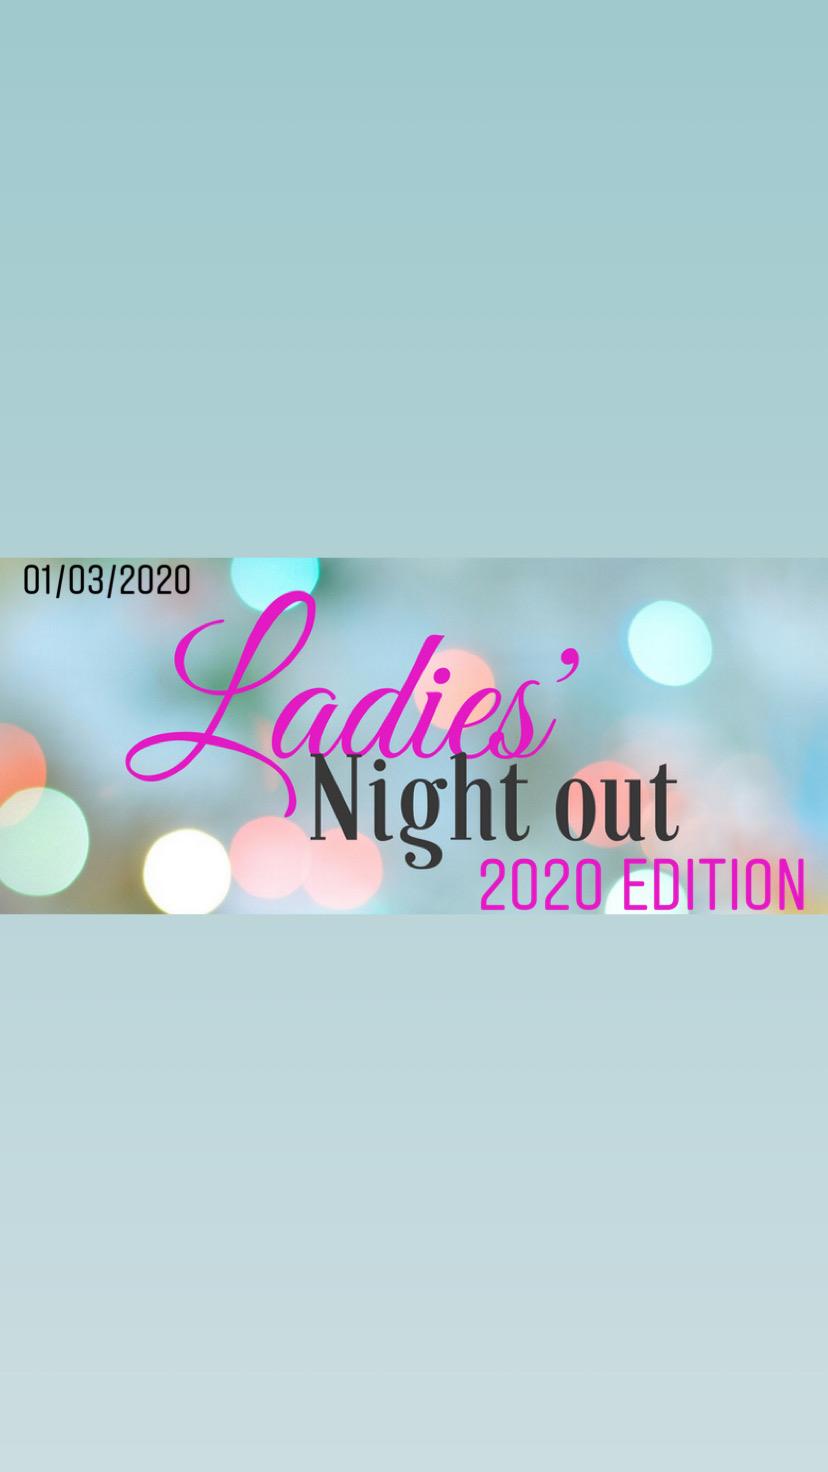 FREE PASSES- “LADIES NIGHT OUT” 2020 EDITION